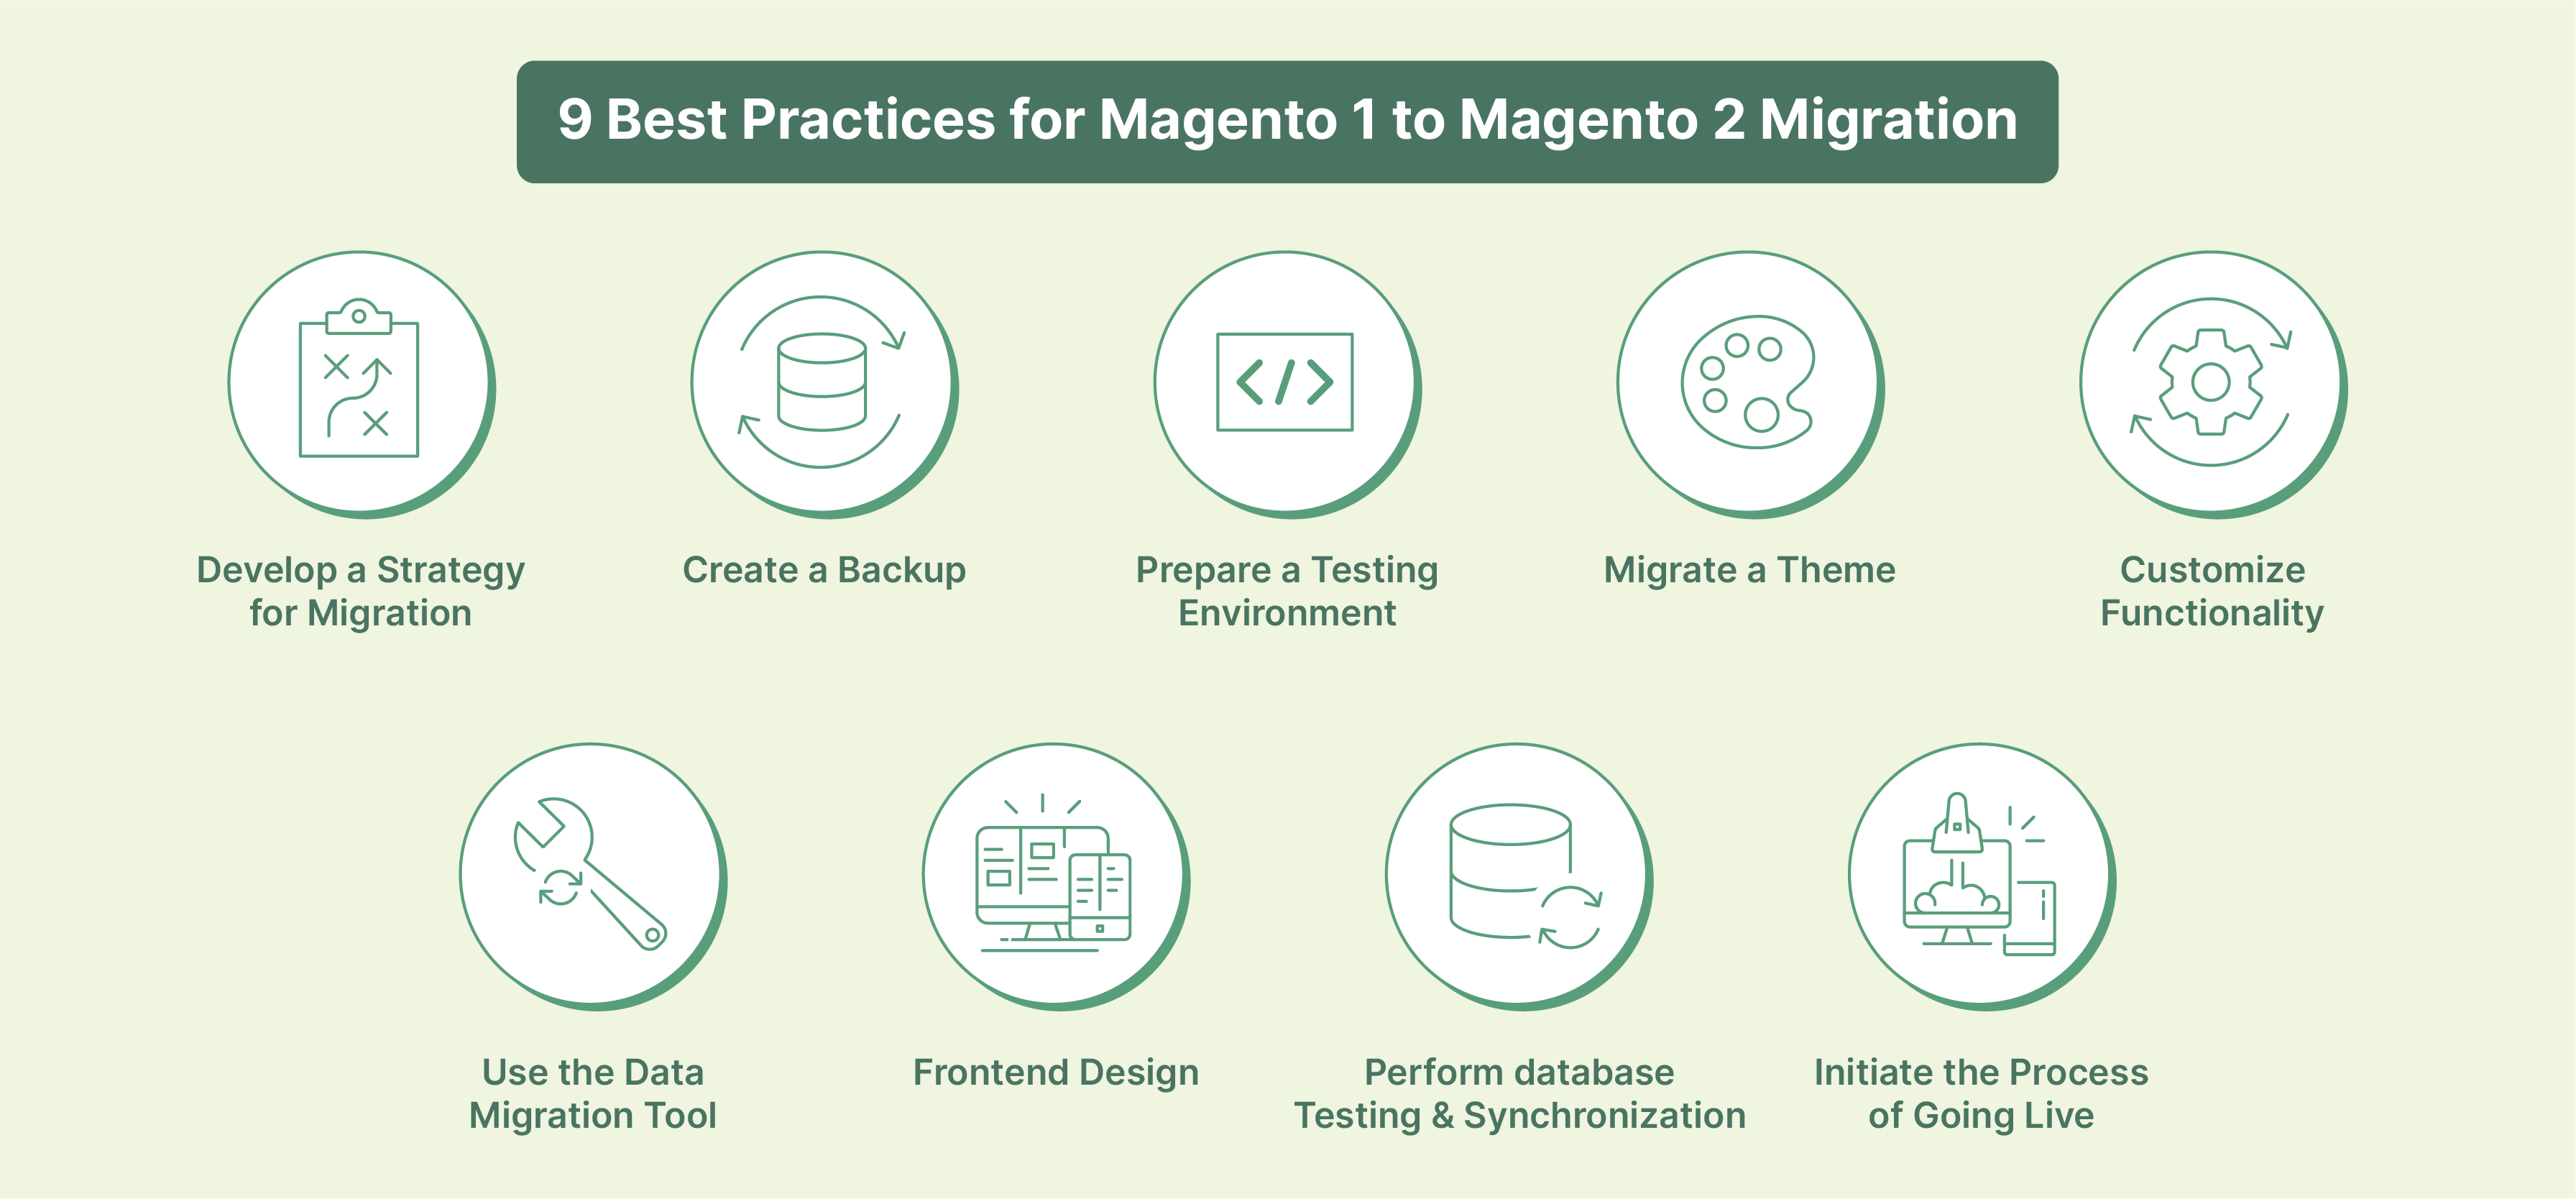 Key Best Practices for Successful Magento 1 to Magento 2 Migration